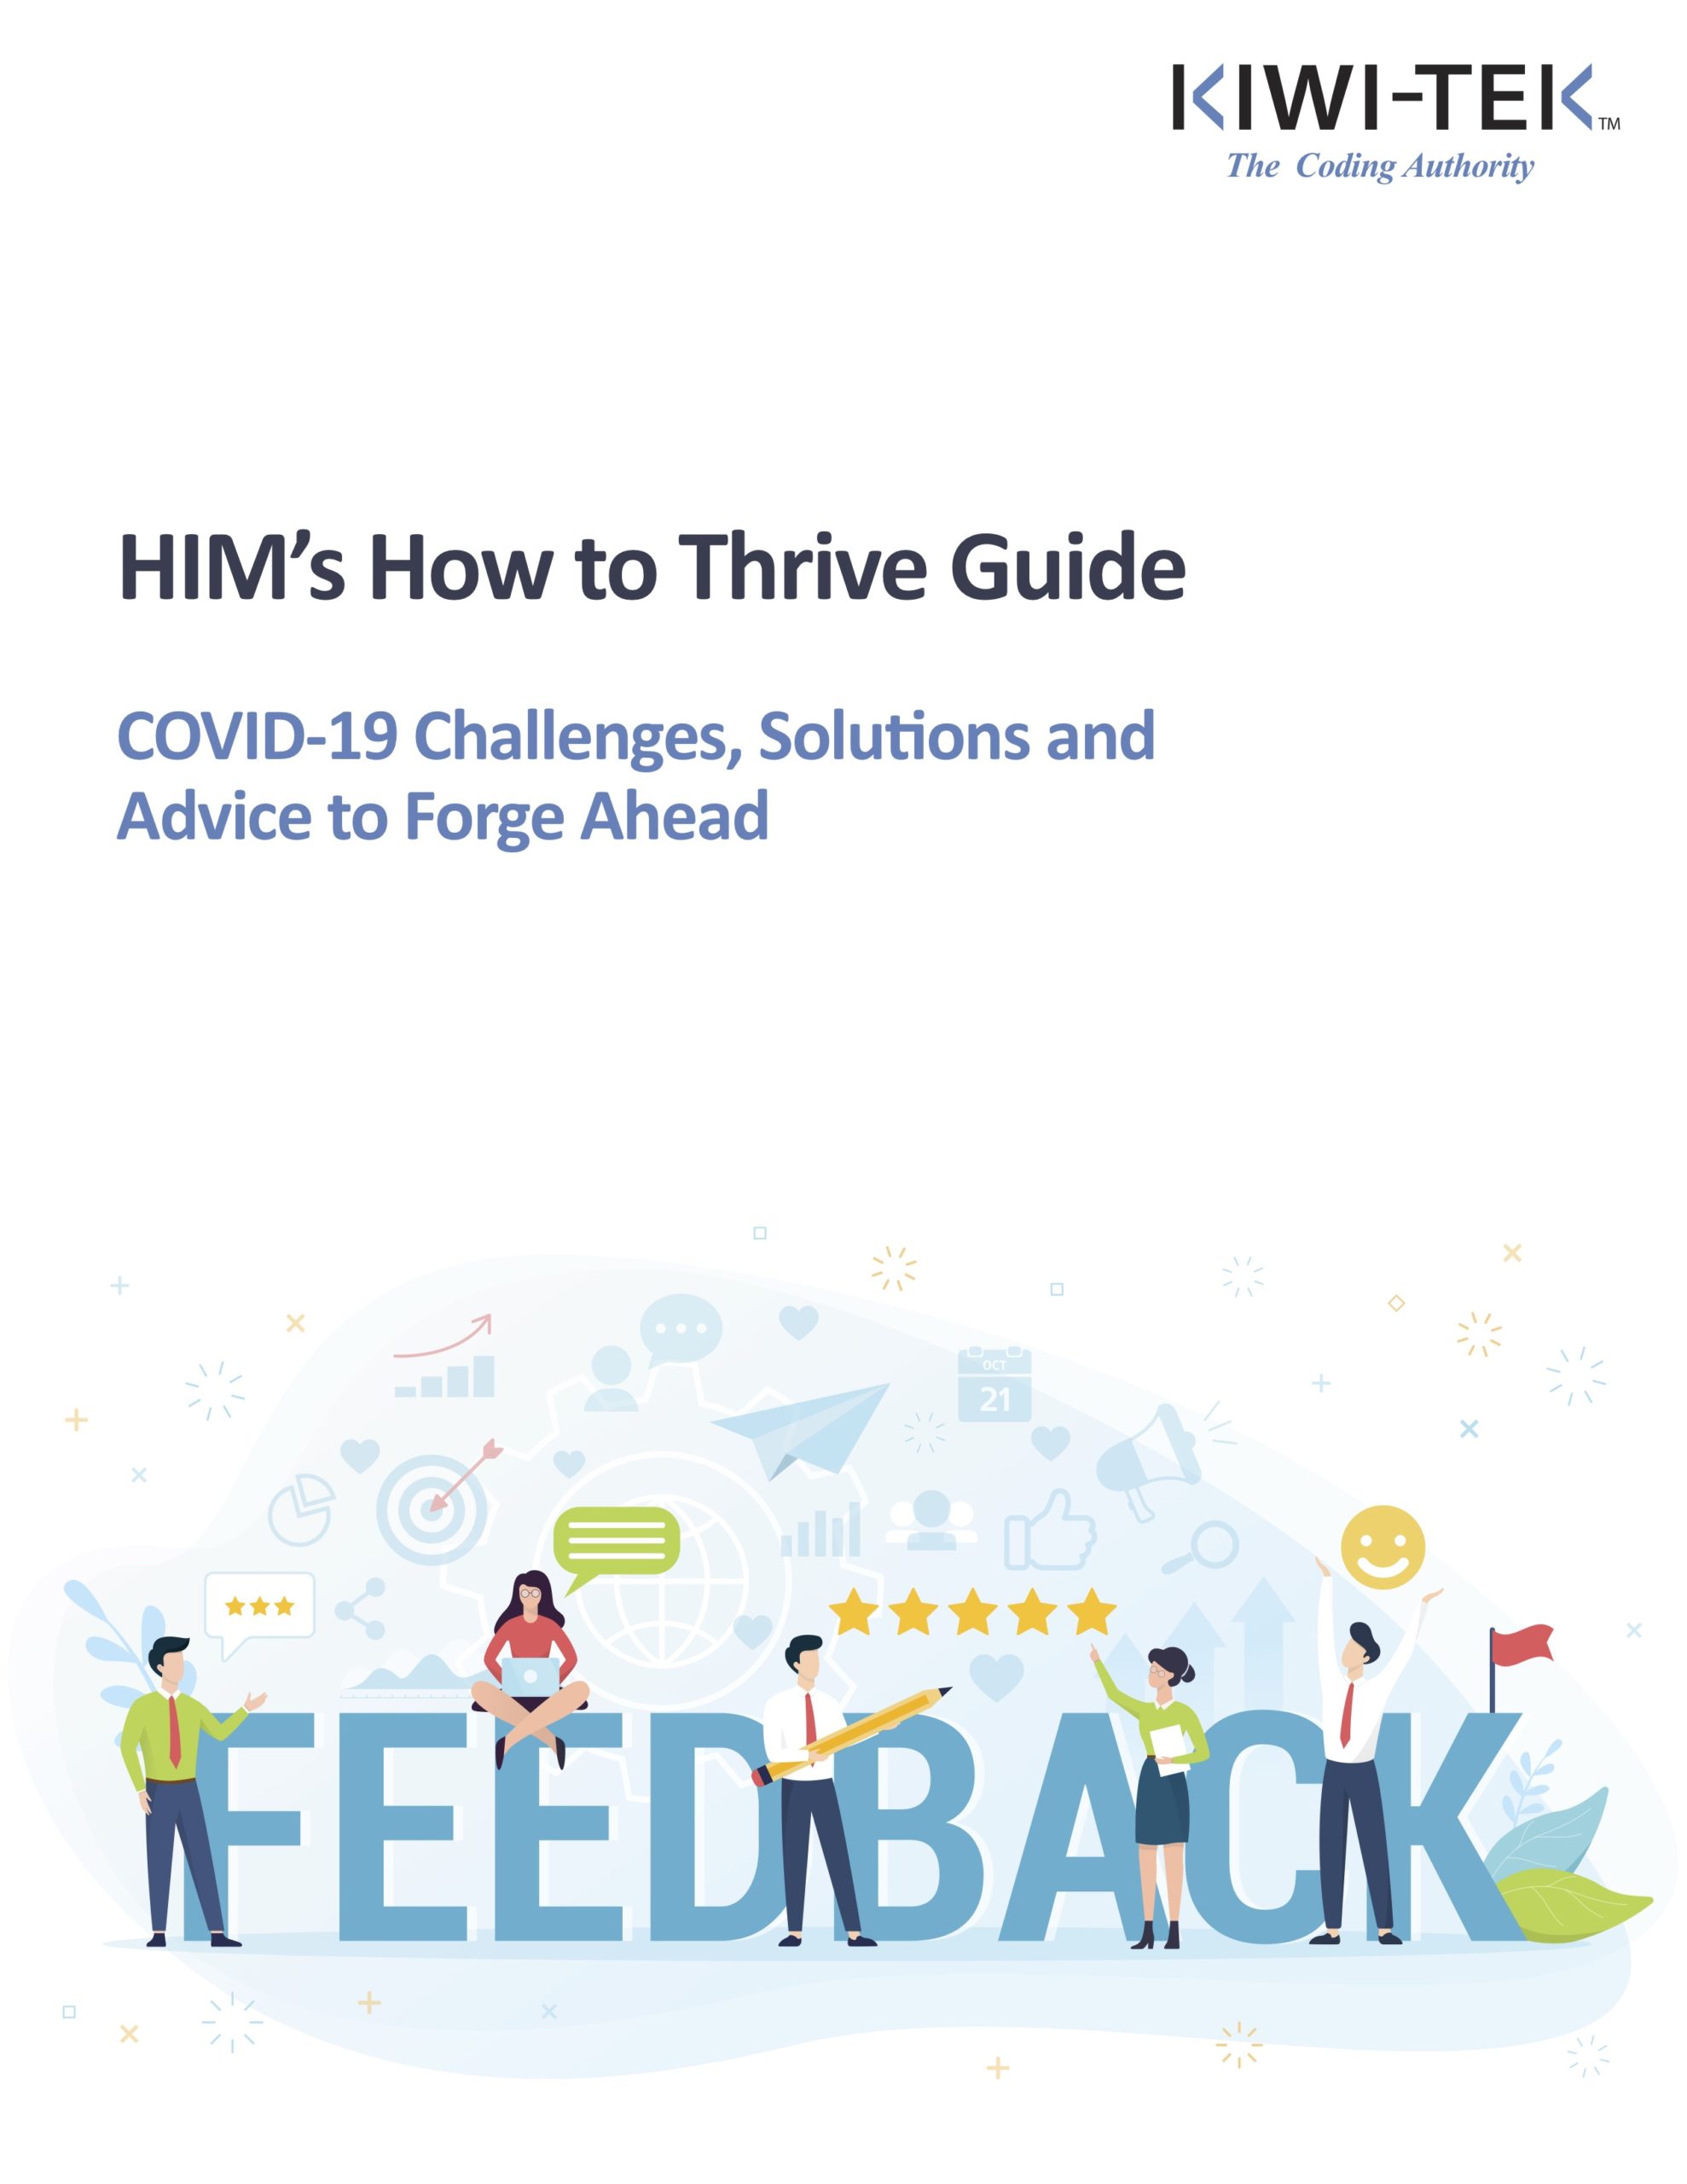 HIM's How to Thrive Guide eBook cover by KIWI-TEK medical coding company